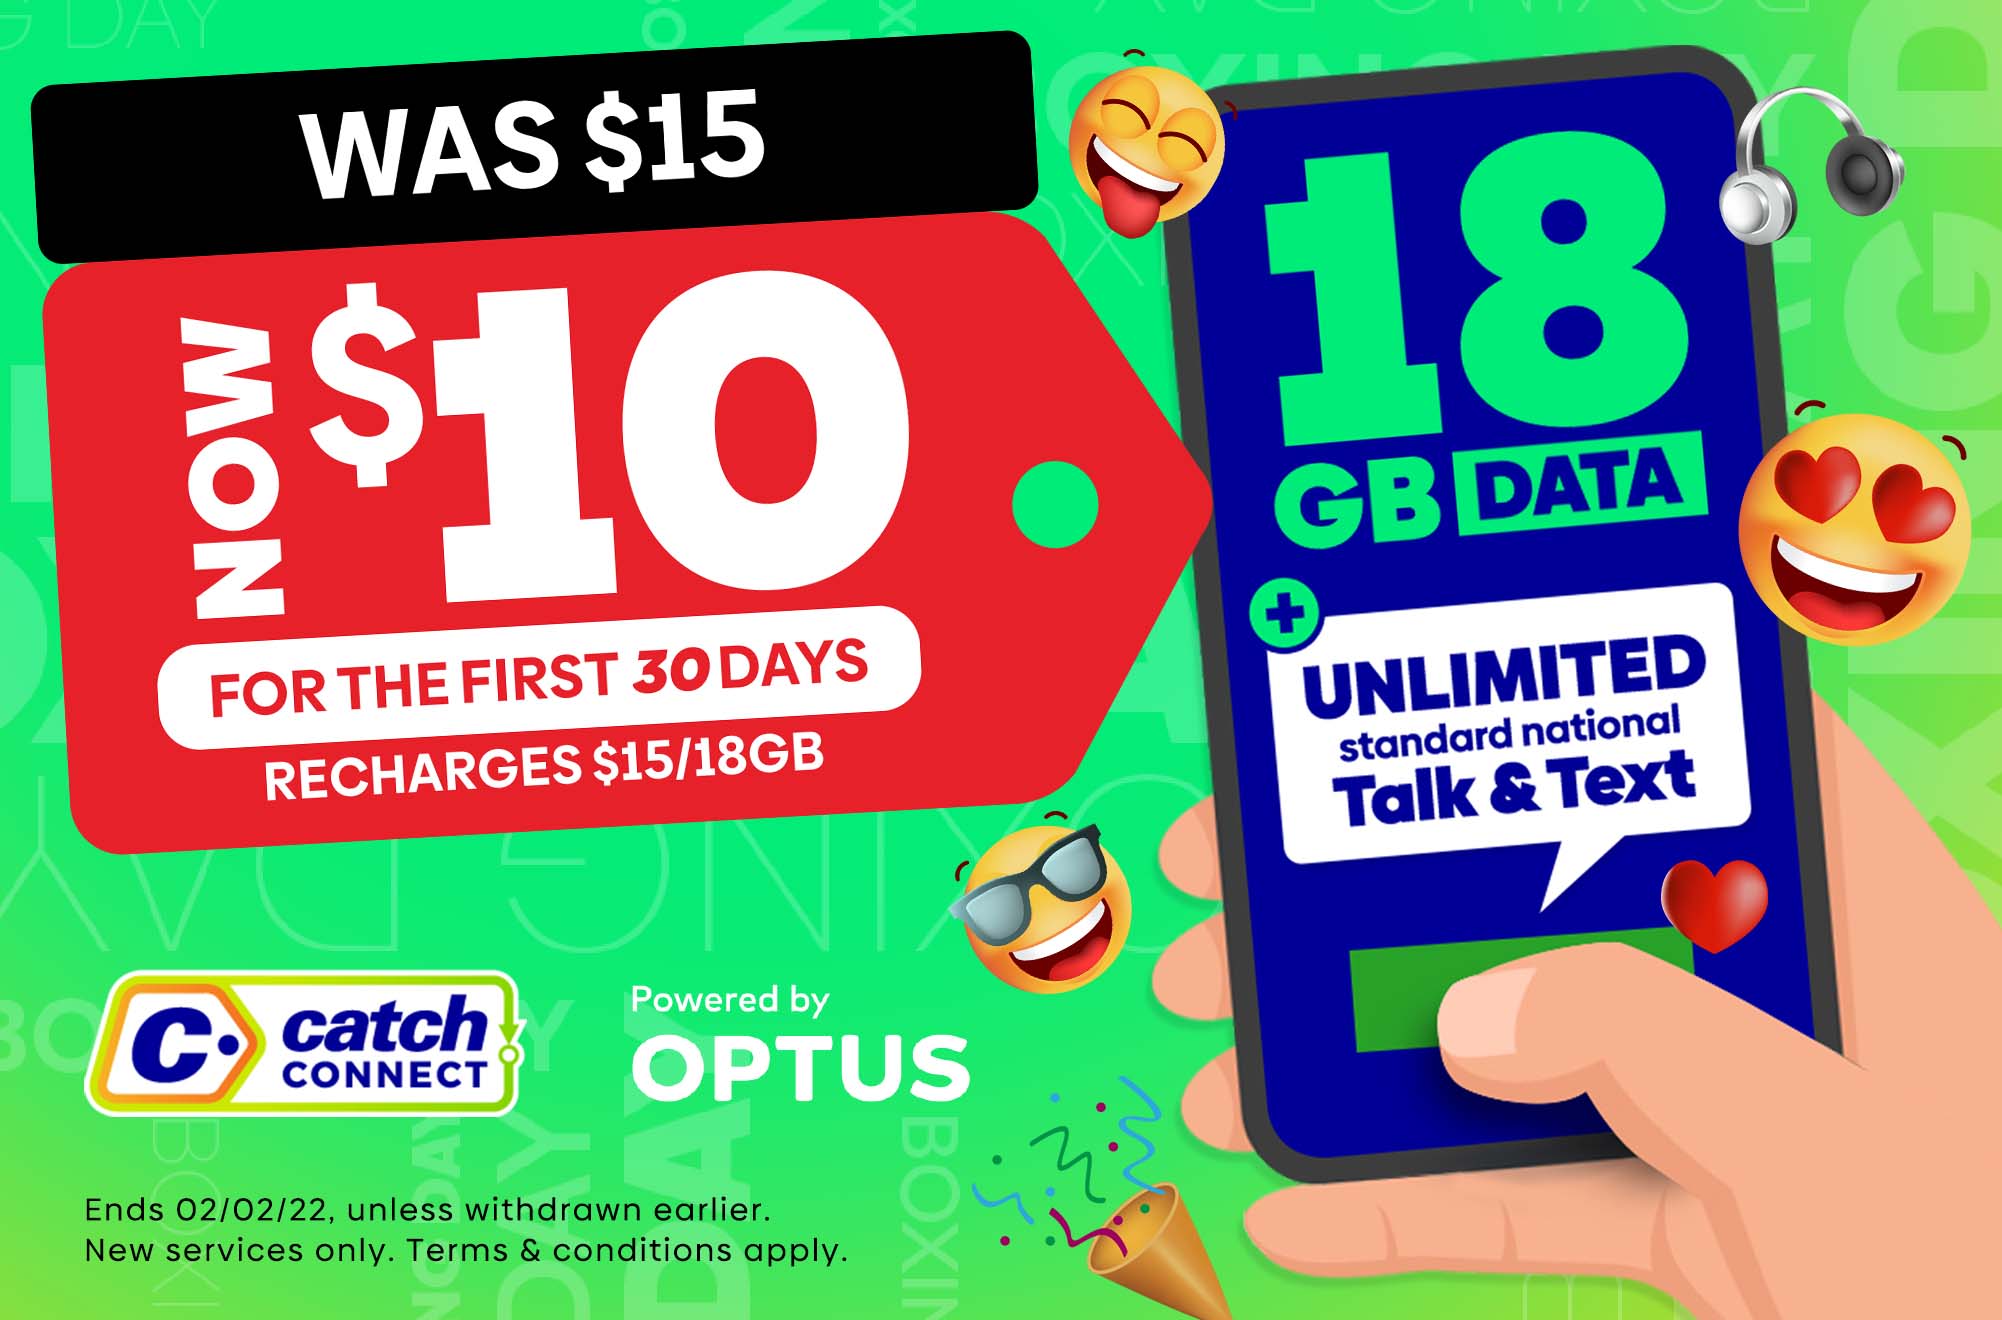 Big Gigs. Call, text, download, stream, repeat! Catch Connect | Powered by Optus